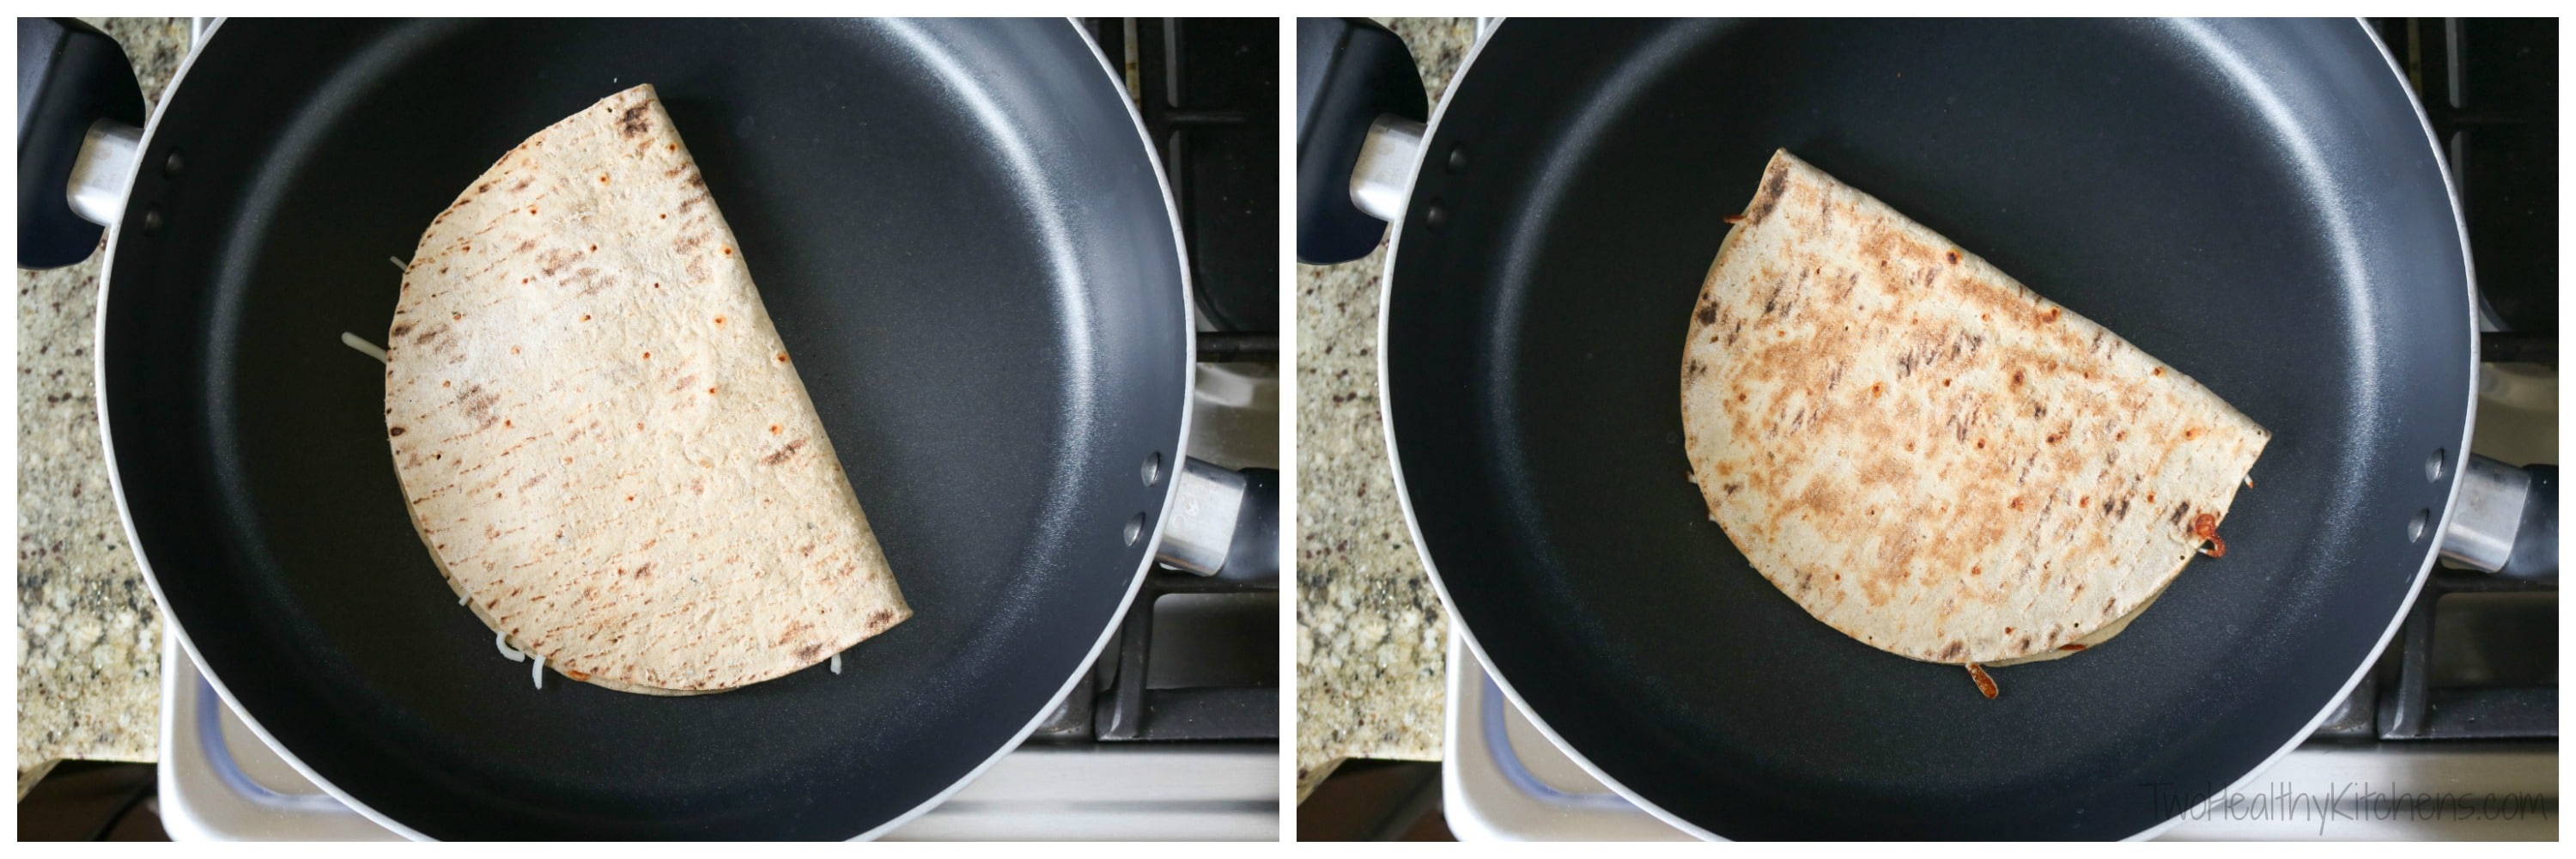 Collage of 2 photos showing quesadilla cooking in pan, before and after it's golden and toasted.